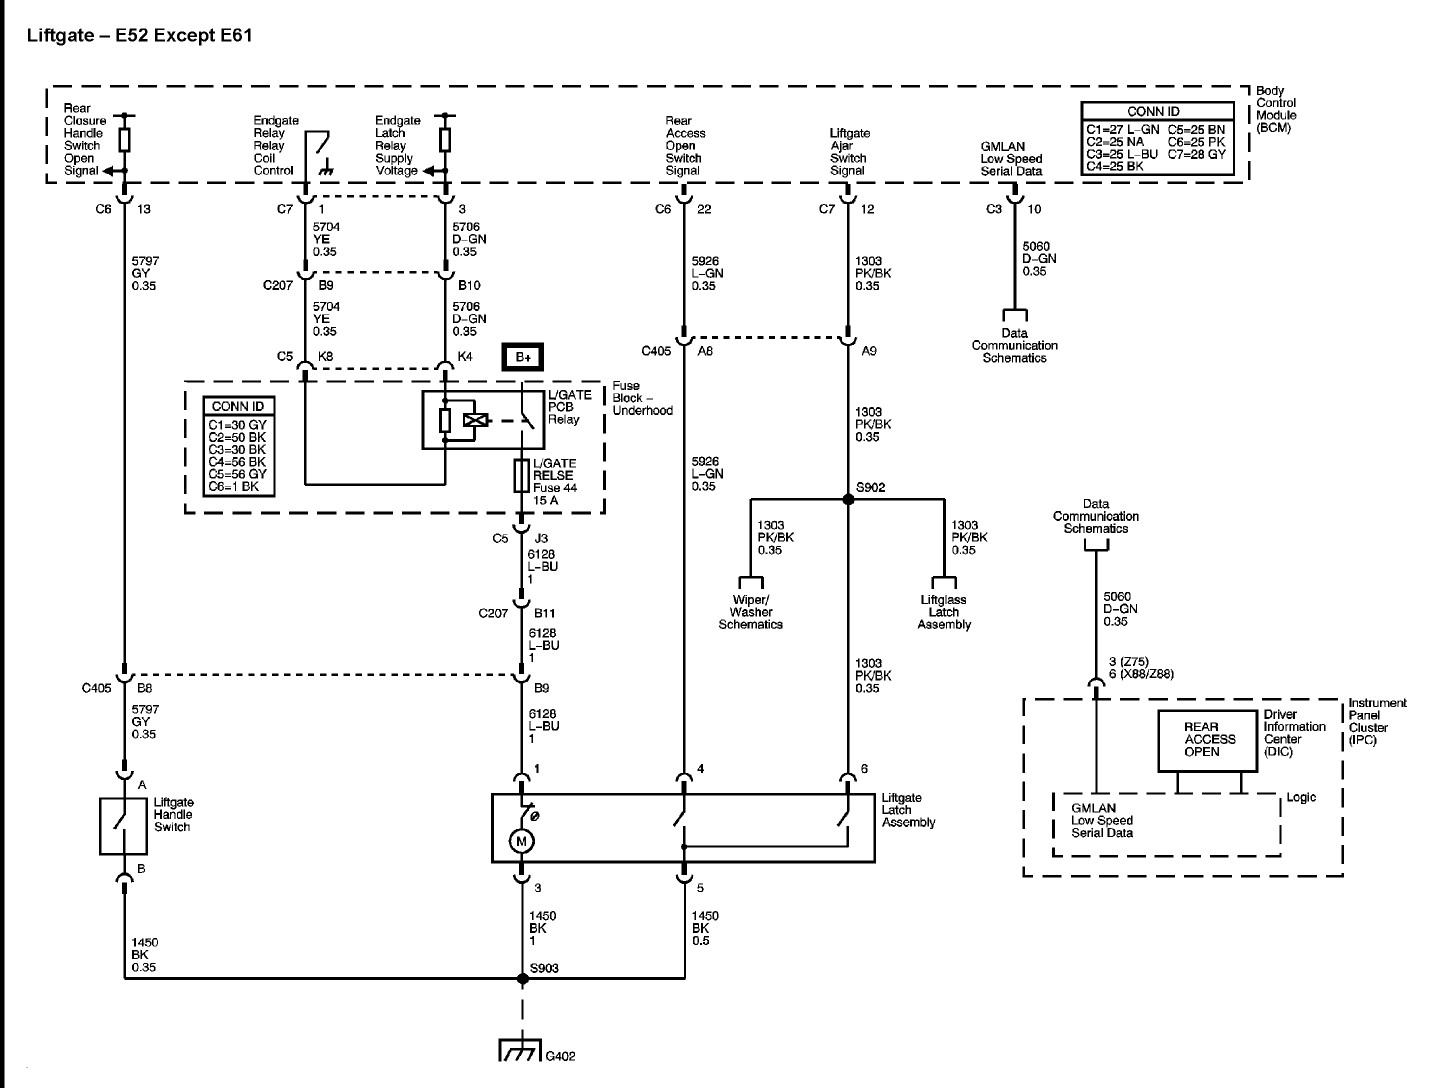 2007 Bmw Bcm Connections Diagram Hummer H3 Bcm Wiring Diagram Of 2007 Bmw Bcm Connections Diagram